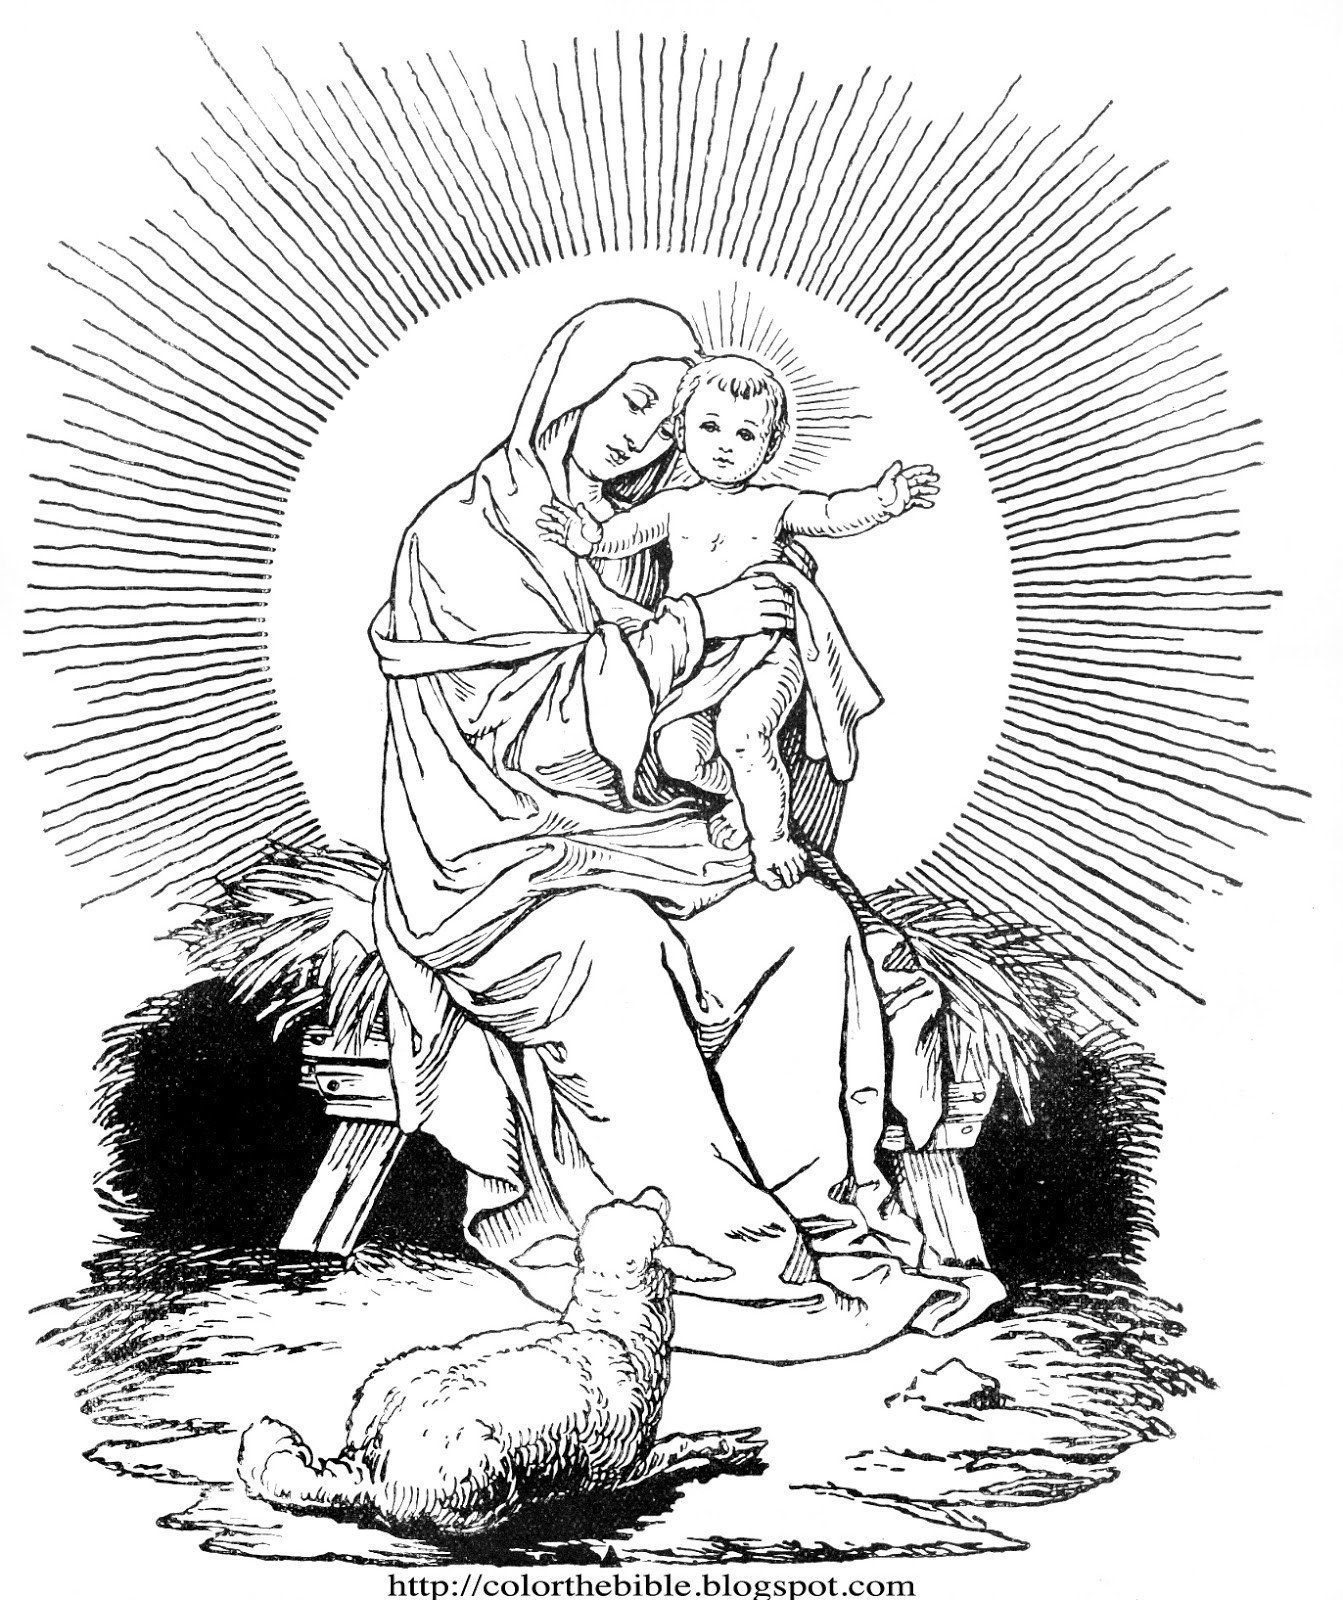 Mary And Baby Jesus Coloring Page
 The Divine Infant Jesus